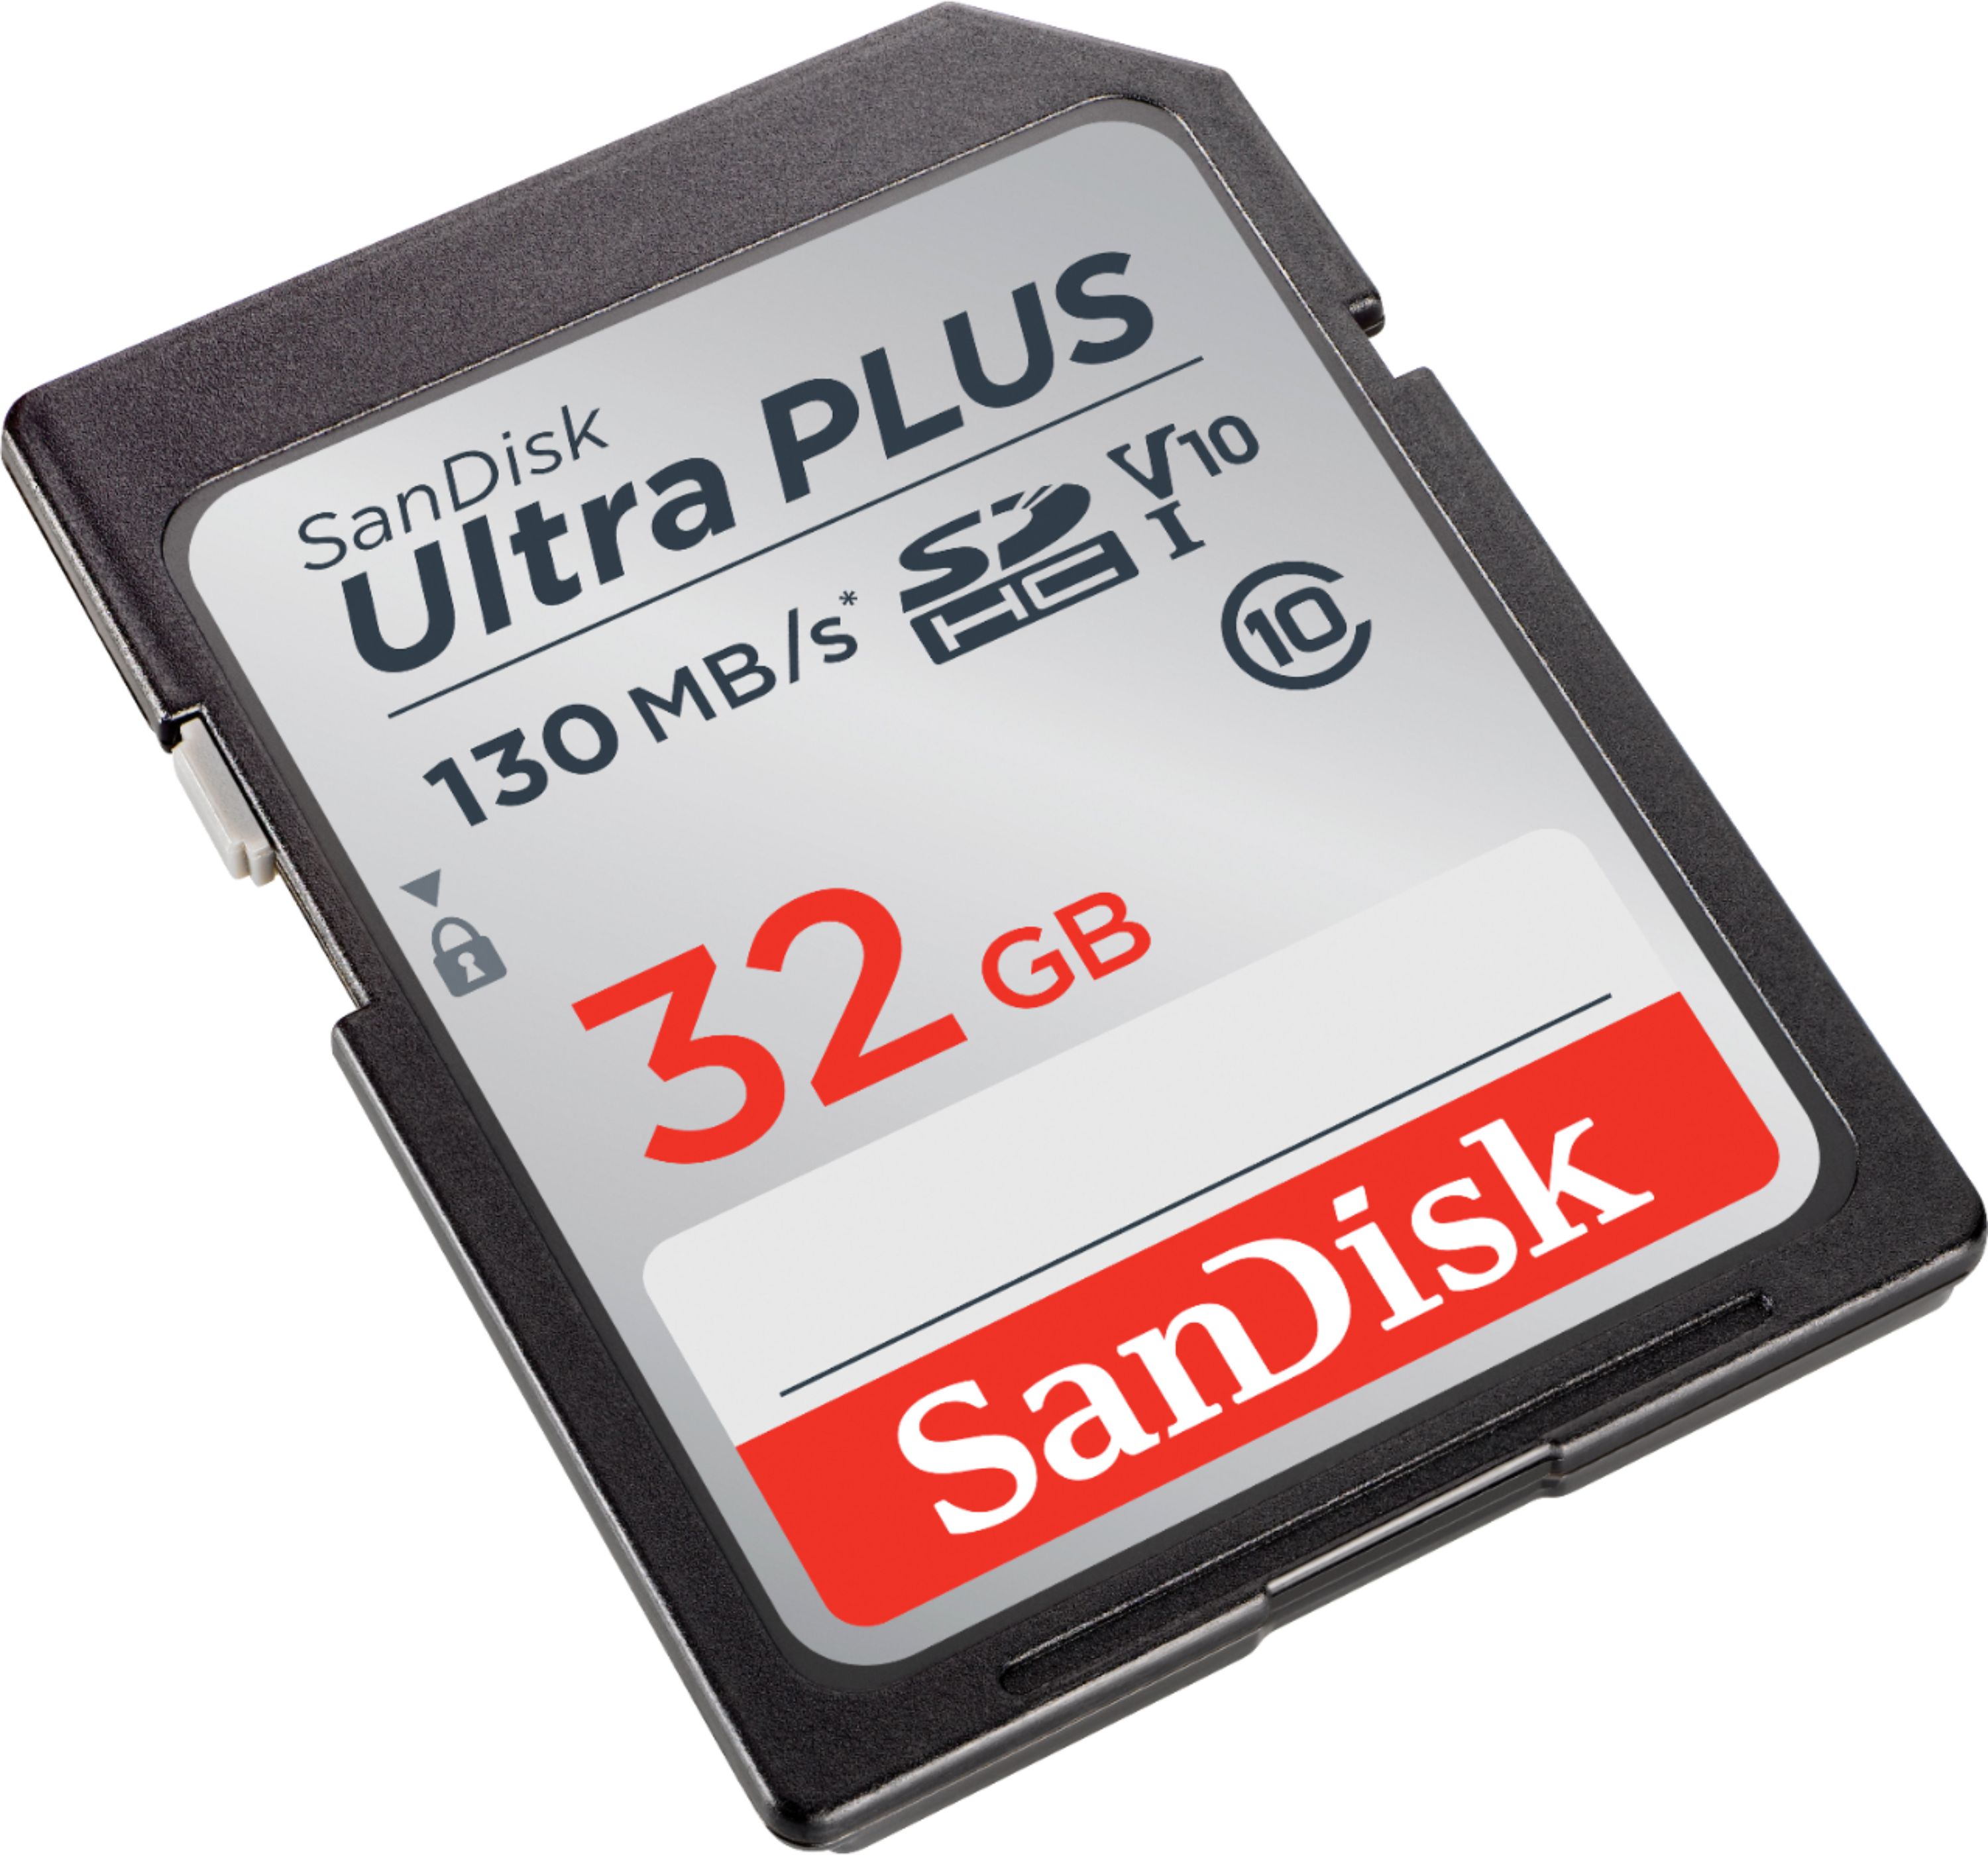 Milieuactivist zonsondergang China SanDisk Ultra Plus 32GB SDHC UHS-I Memory Card SDSDUW3-032G-AN6IN - Best Buy